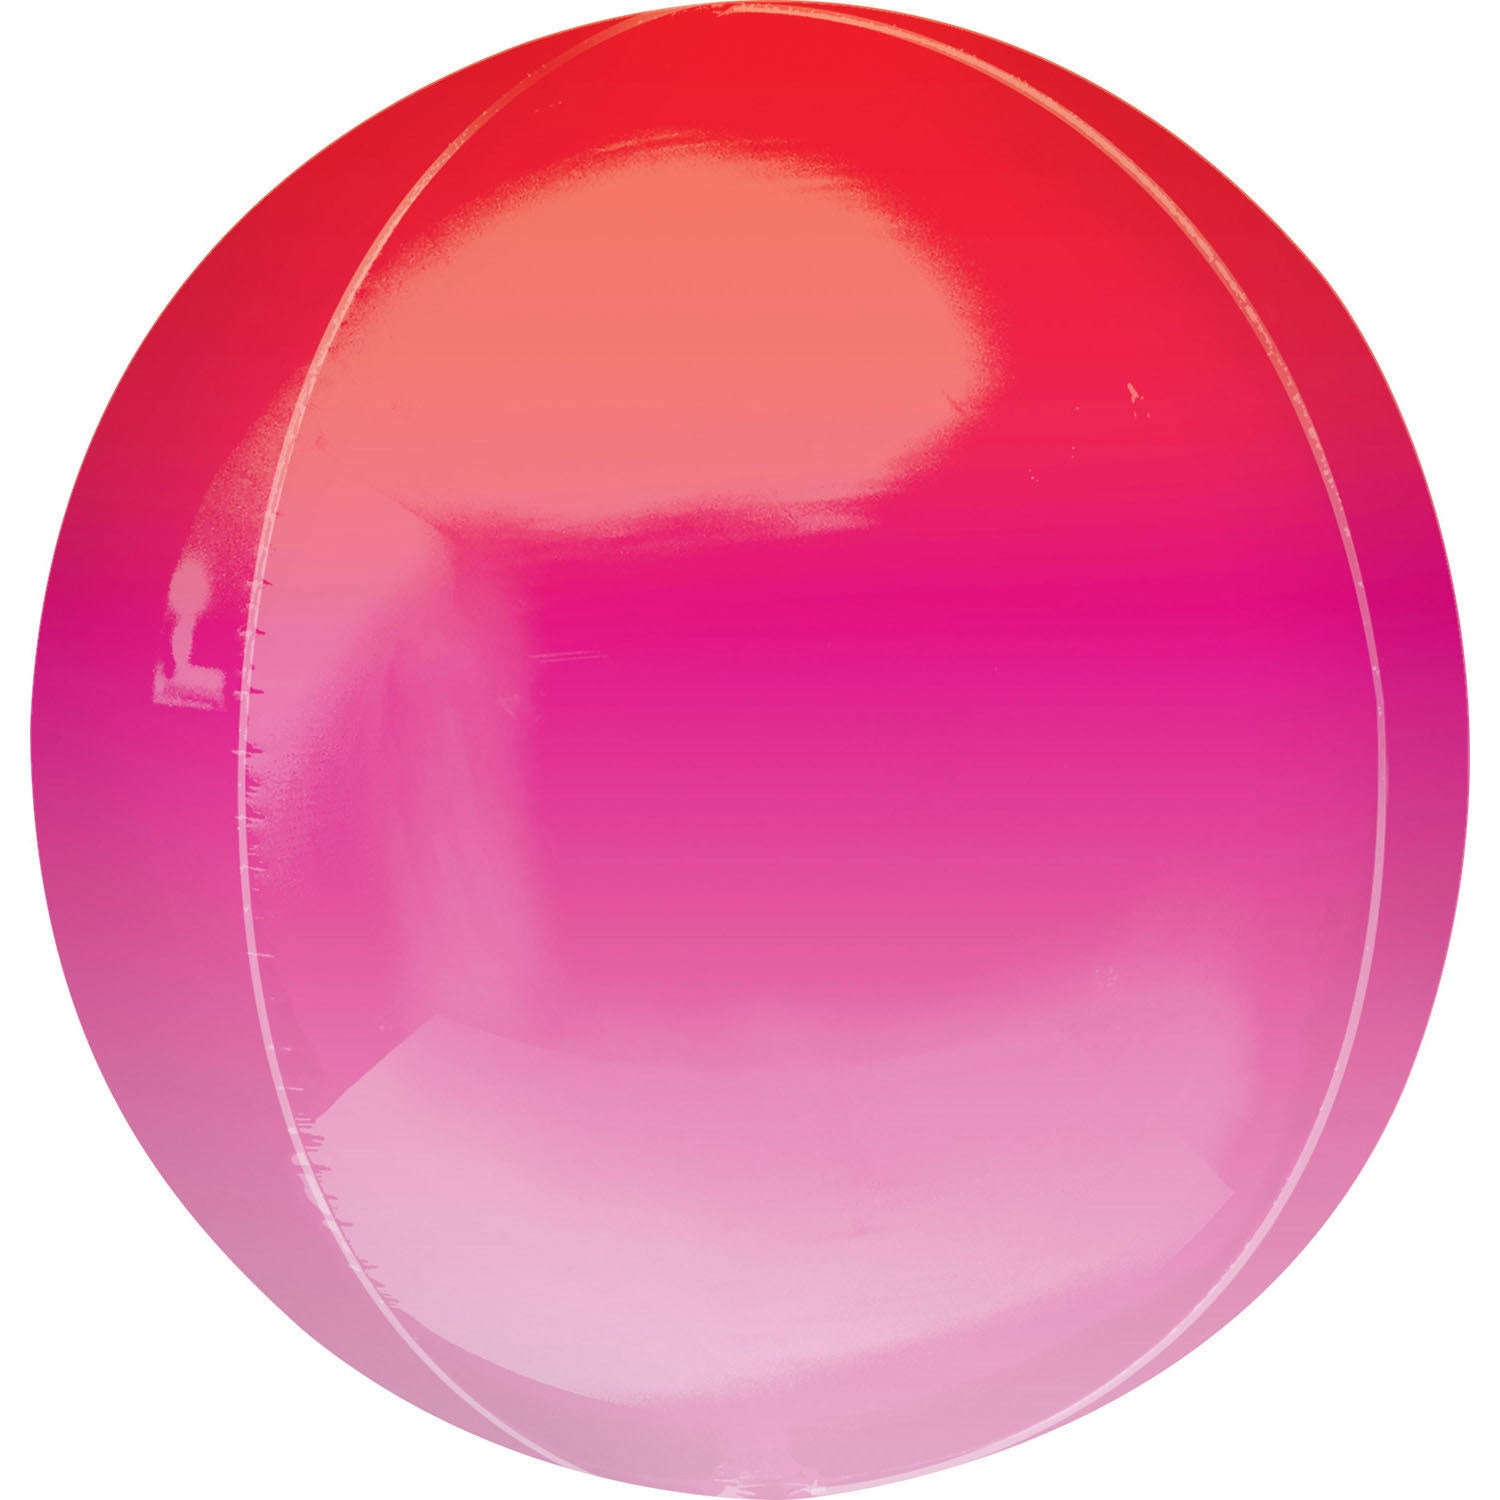 Spherical bubble pink transitional ombre